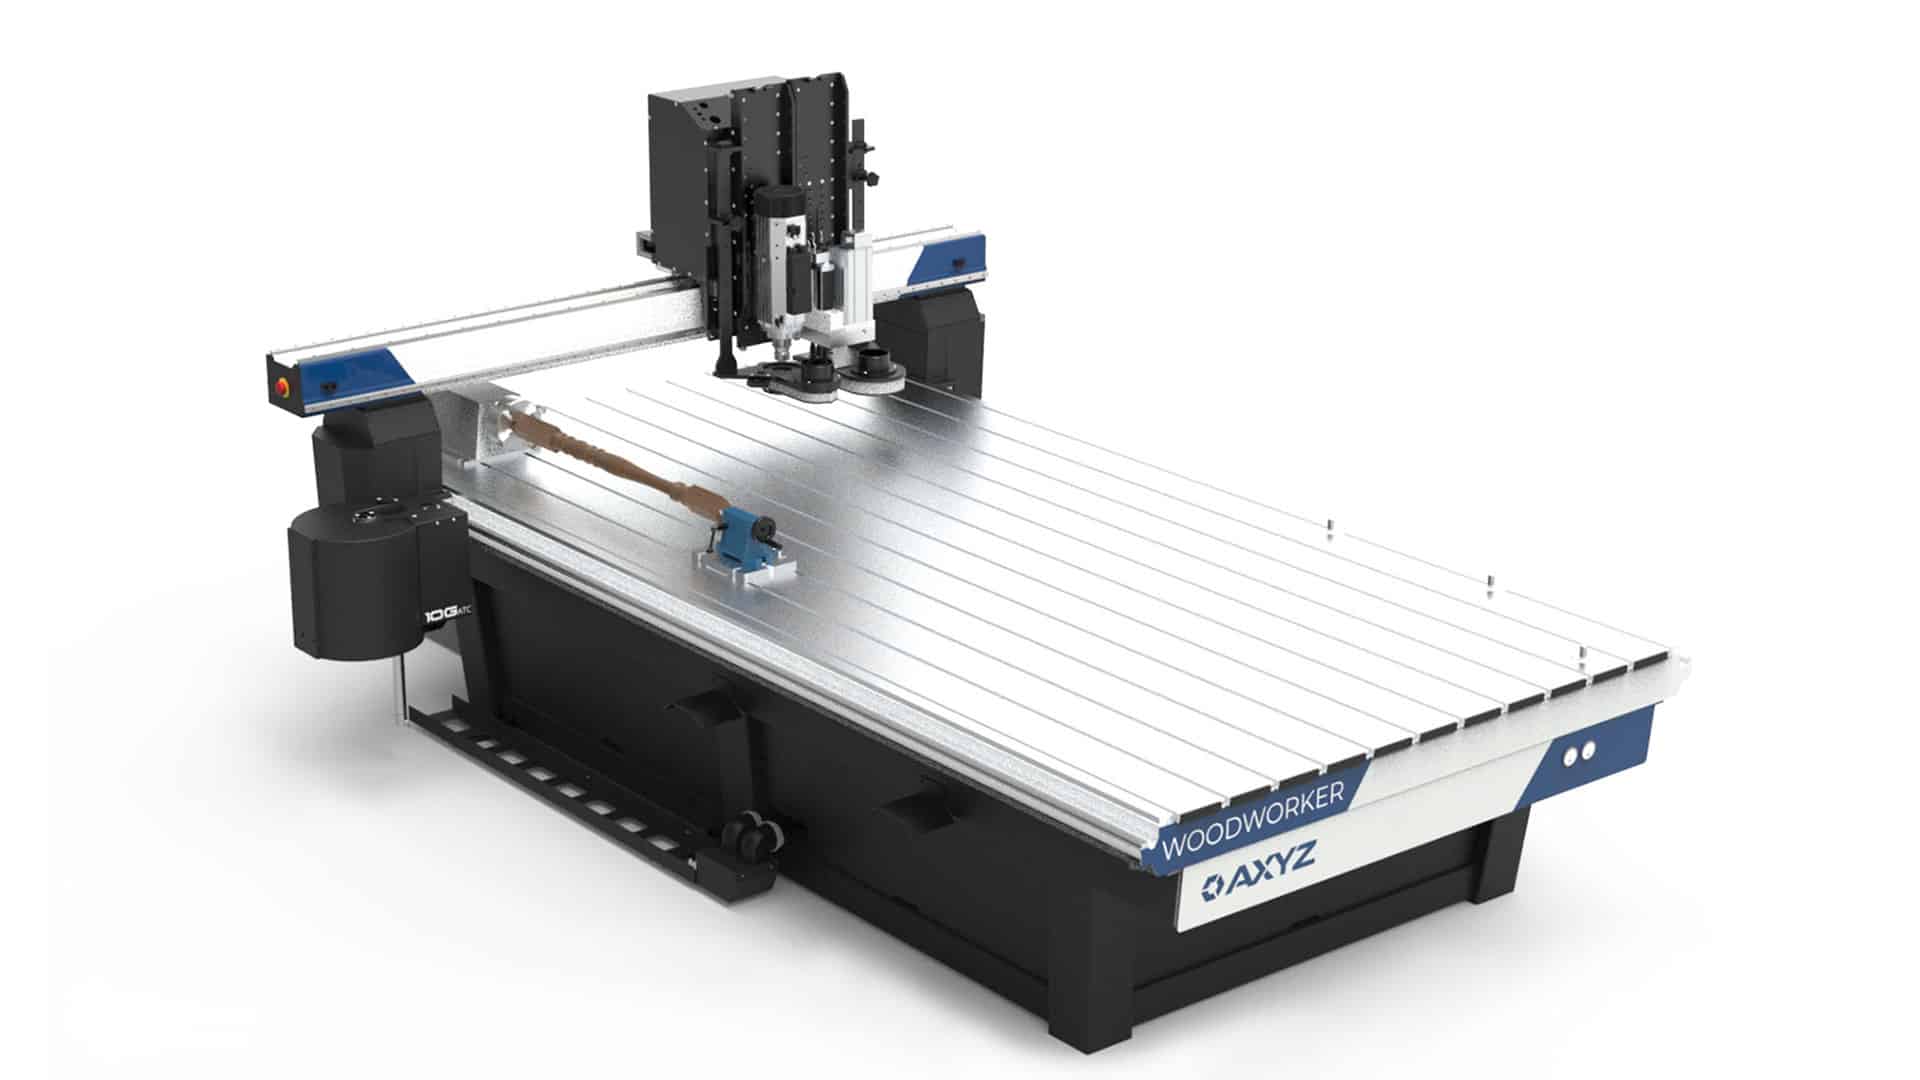 Axyz Woodworker WoodWorker cnc router 16 9 5000 v2 vikiallo